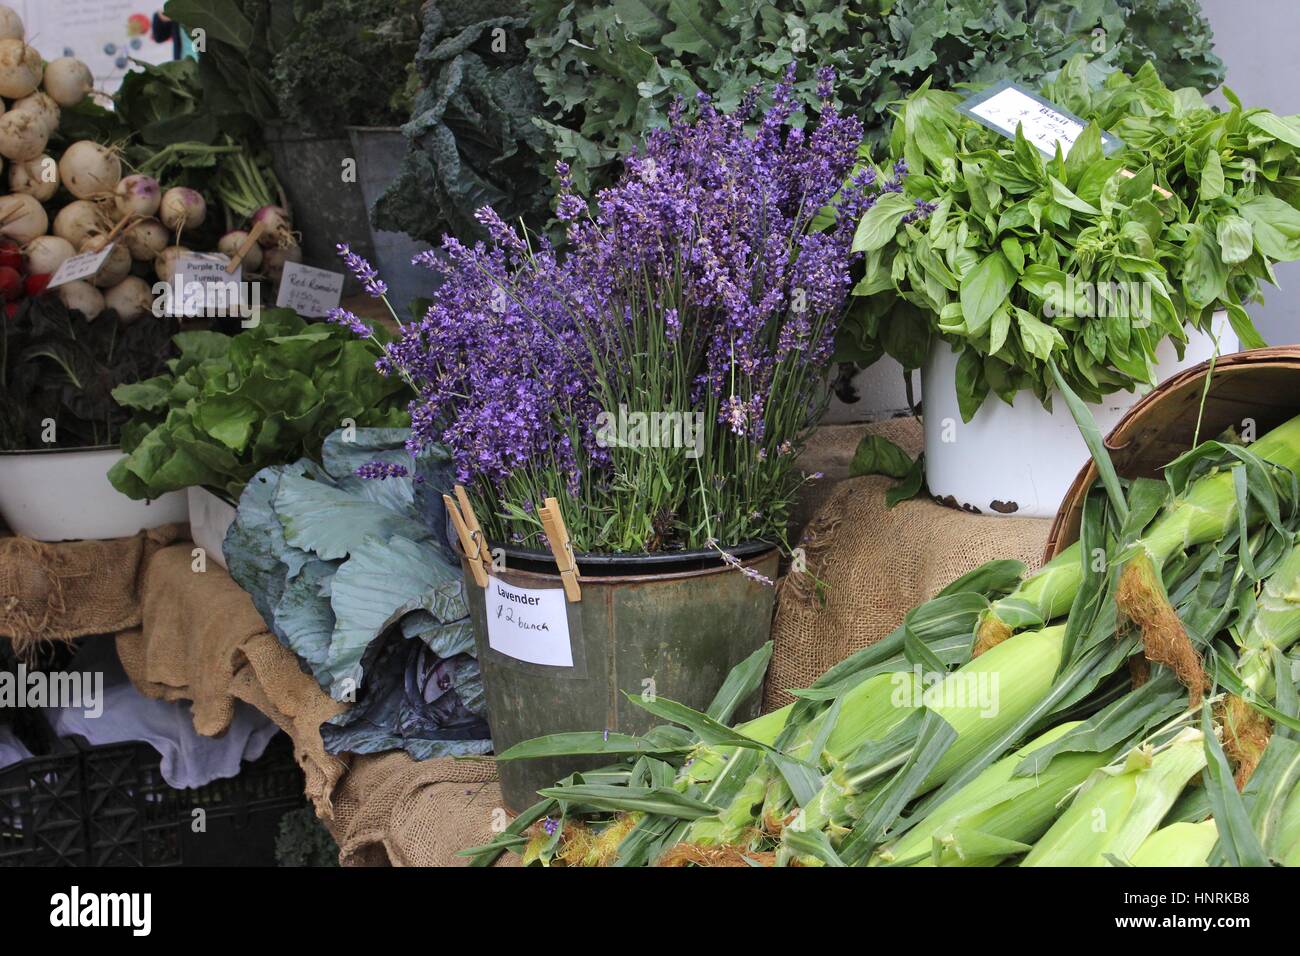 Lavender for sale at a farmer's market Stock Photo